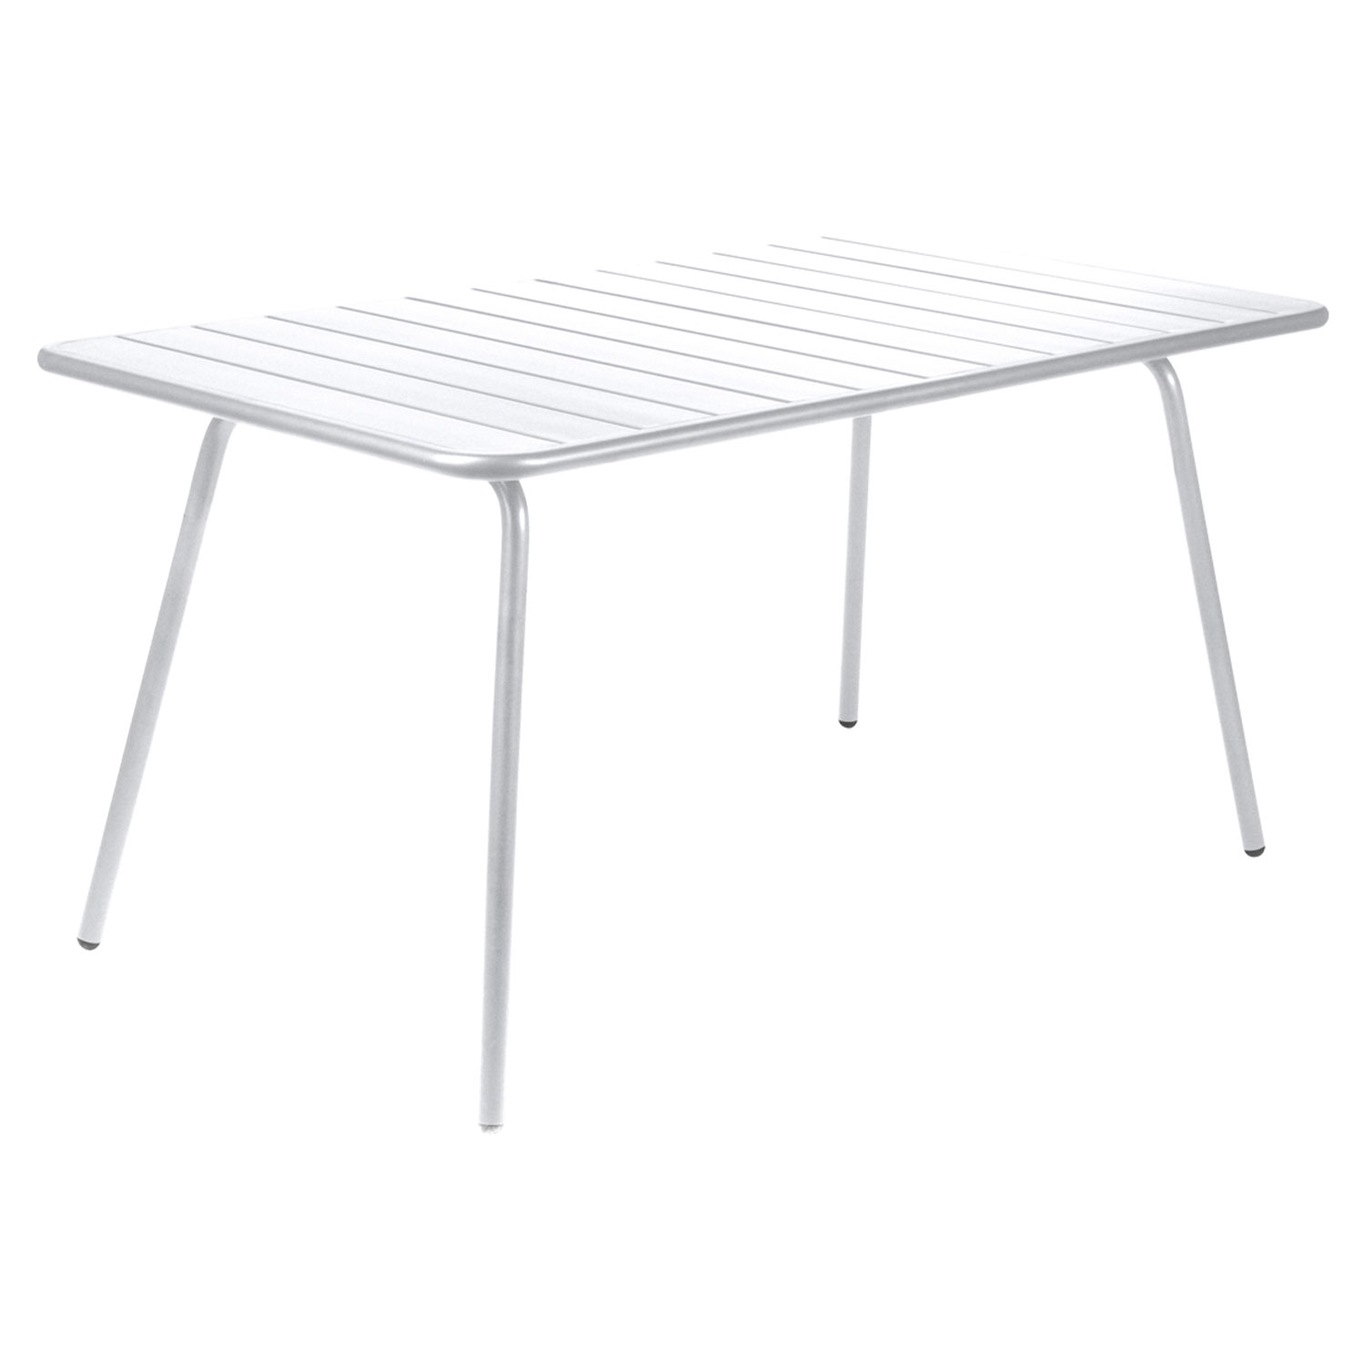 Luxembourg Table 143x80, Cotton White